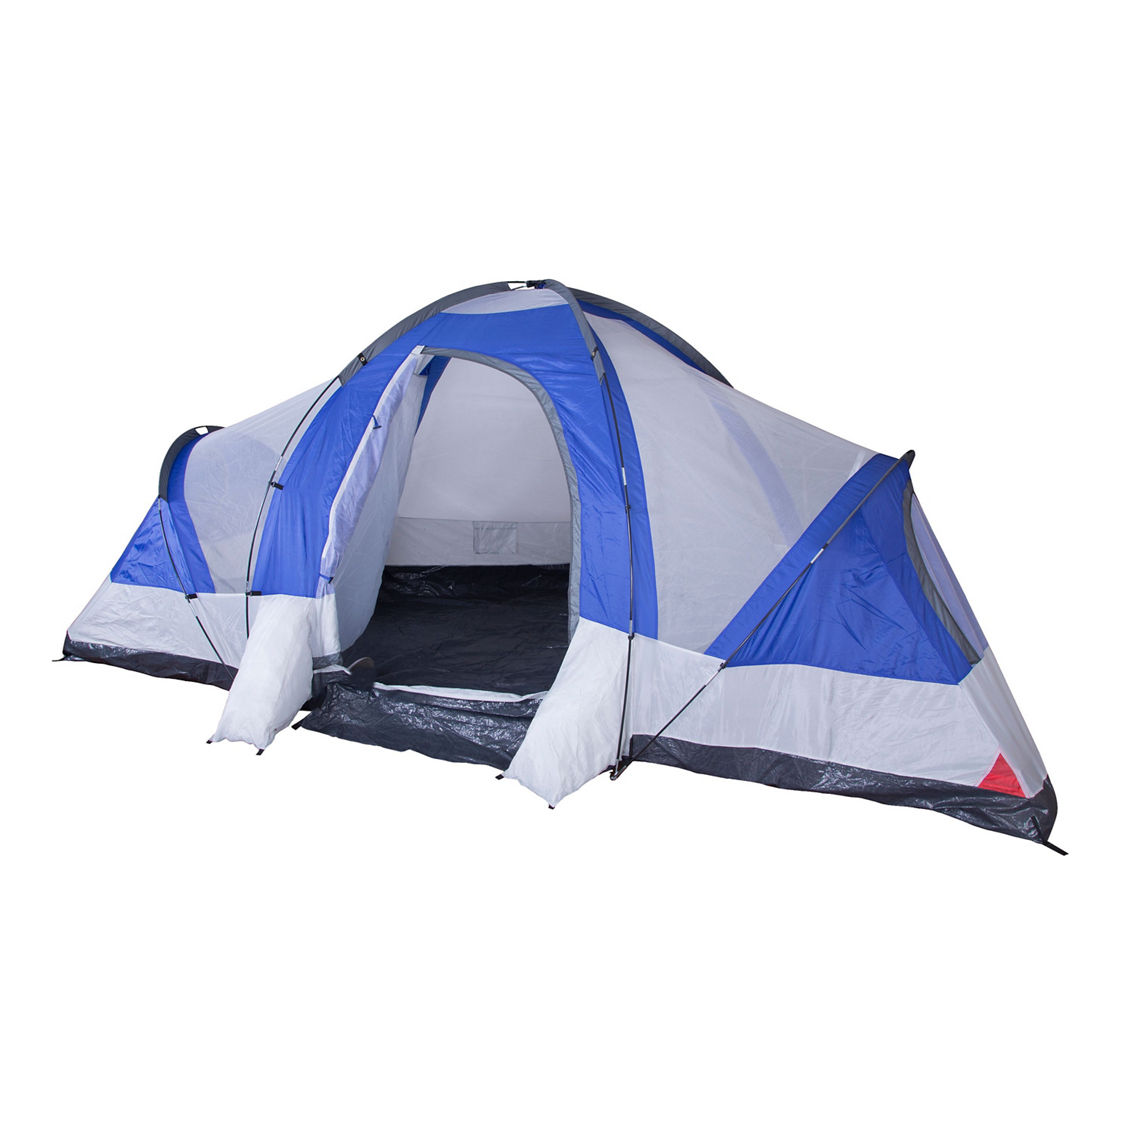 Stansport Grand 18 3-Room Family Tent - Image 1 of 5